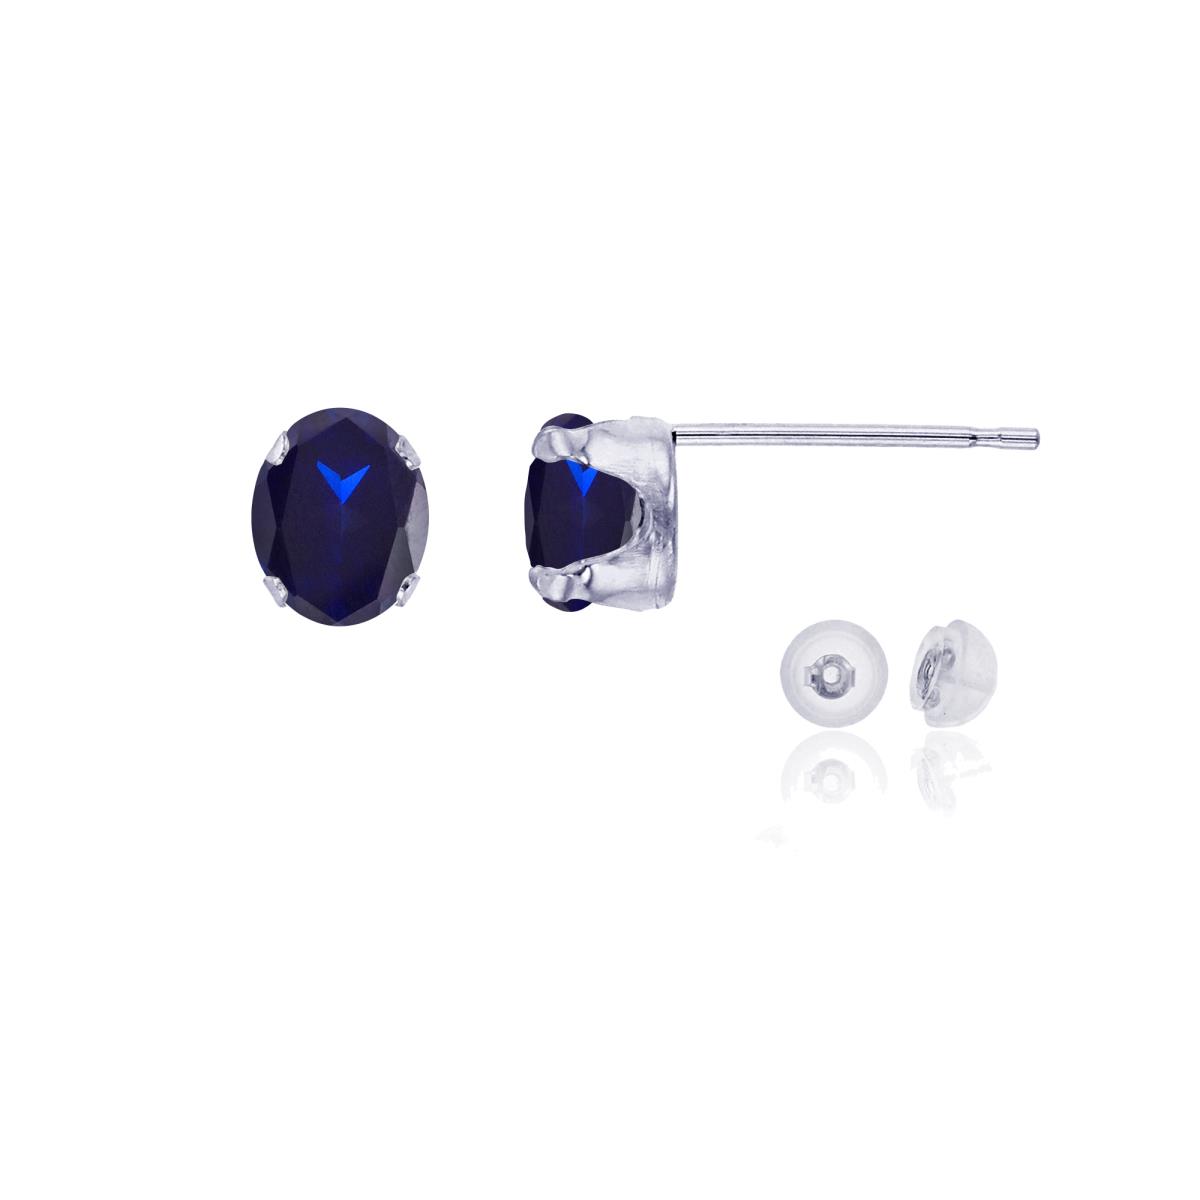 14K White Gold 6x4mm Oval Sapphire Stud Earring with Silicone Back